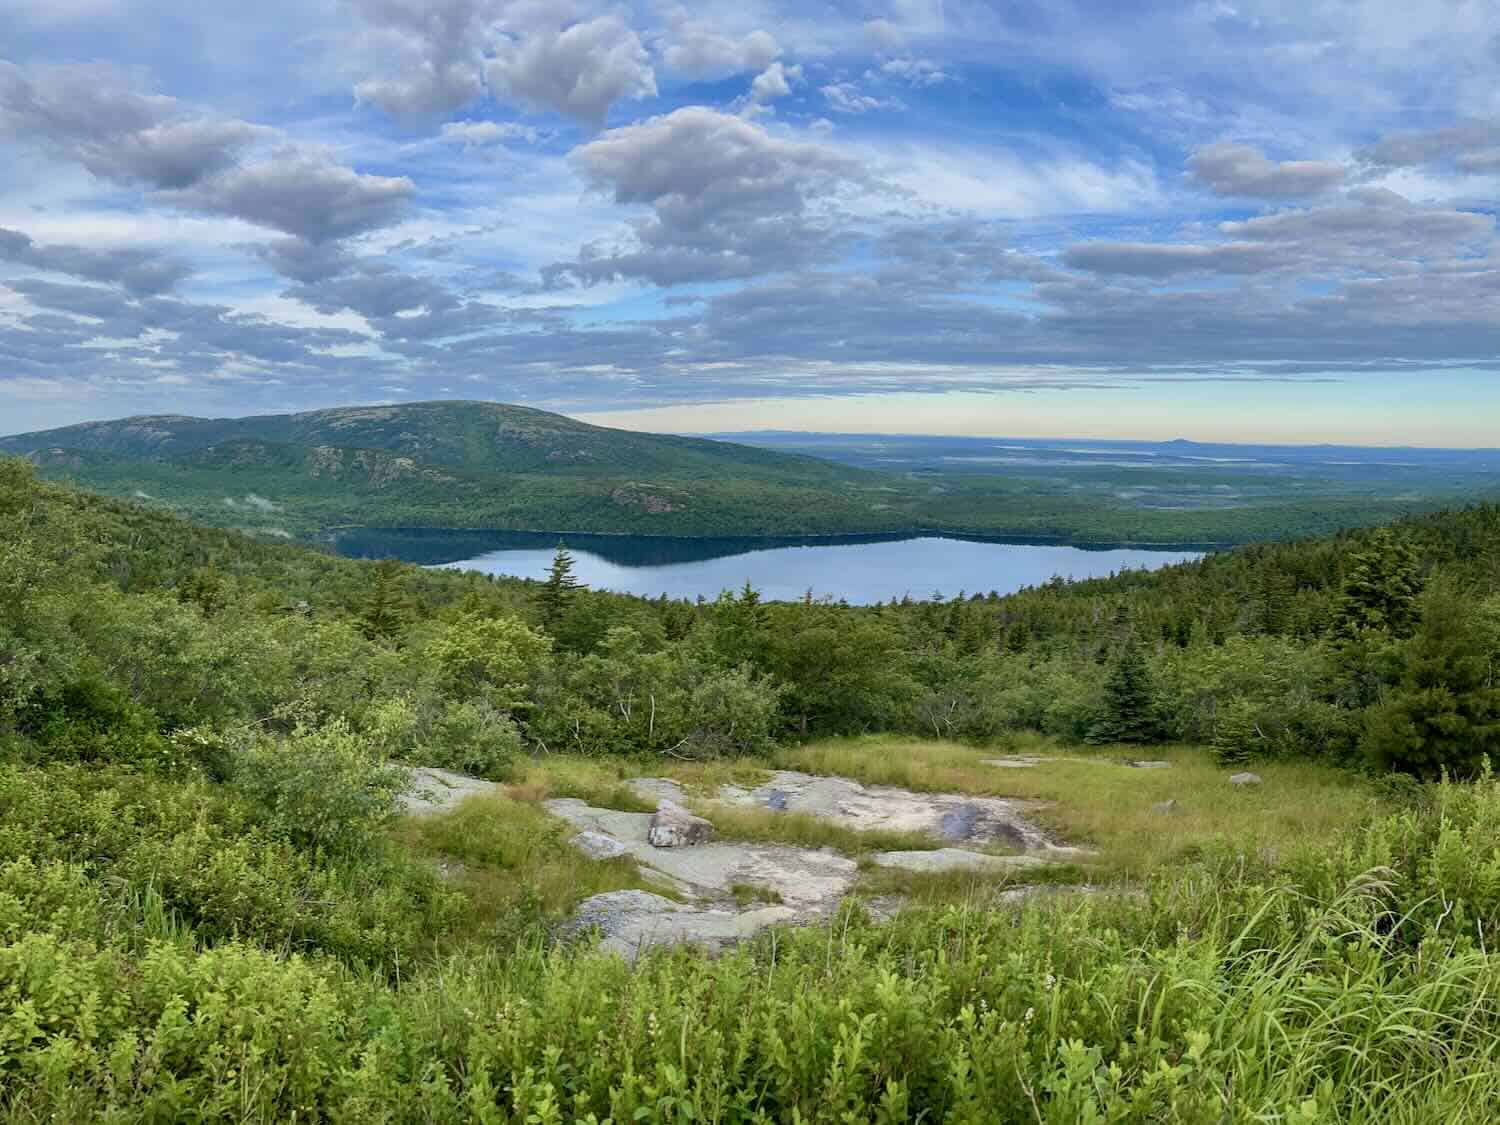 A lake surrounded by a green landscape in Acadia National Park.